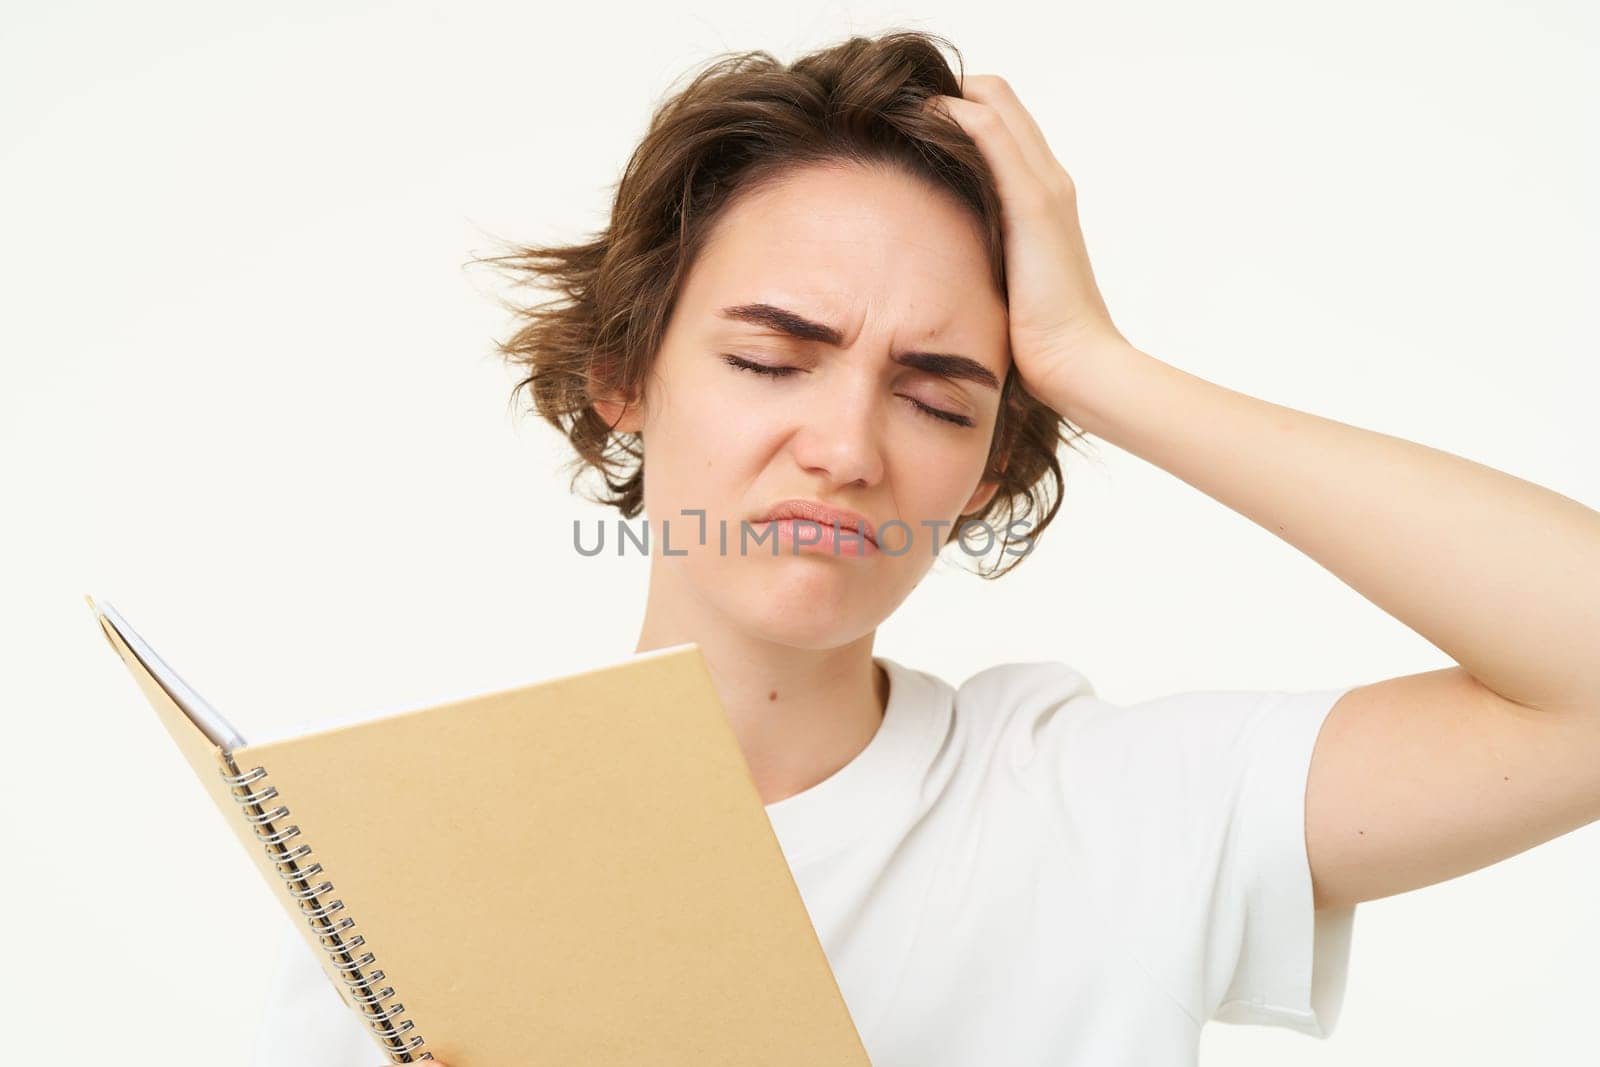 Portrait of puzzled, upset young woman tired of doing homework, holding planner with complicated face, standing over white background.